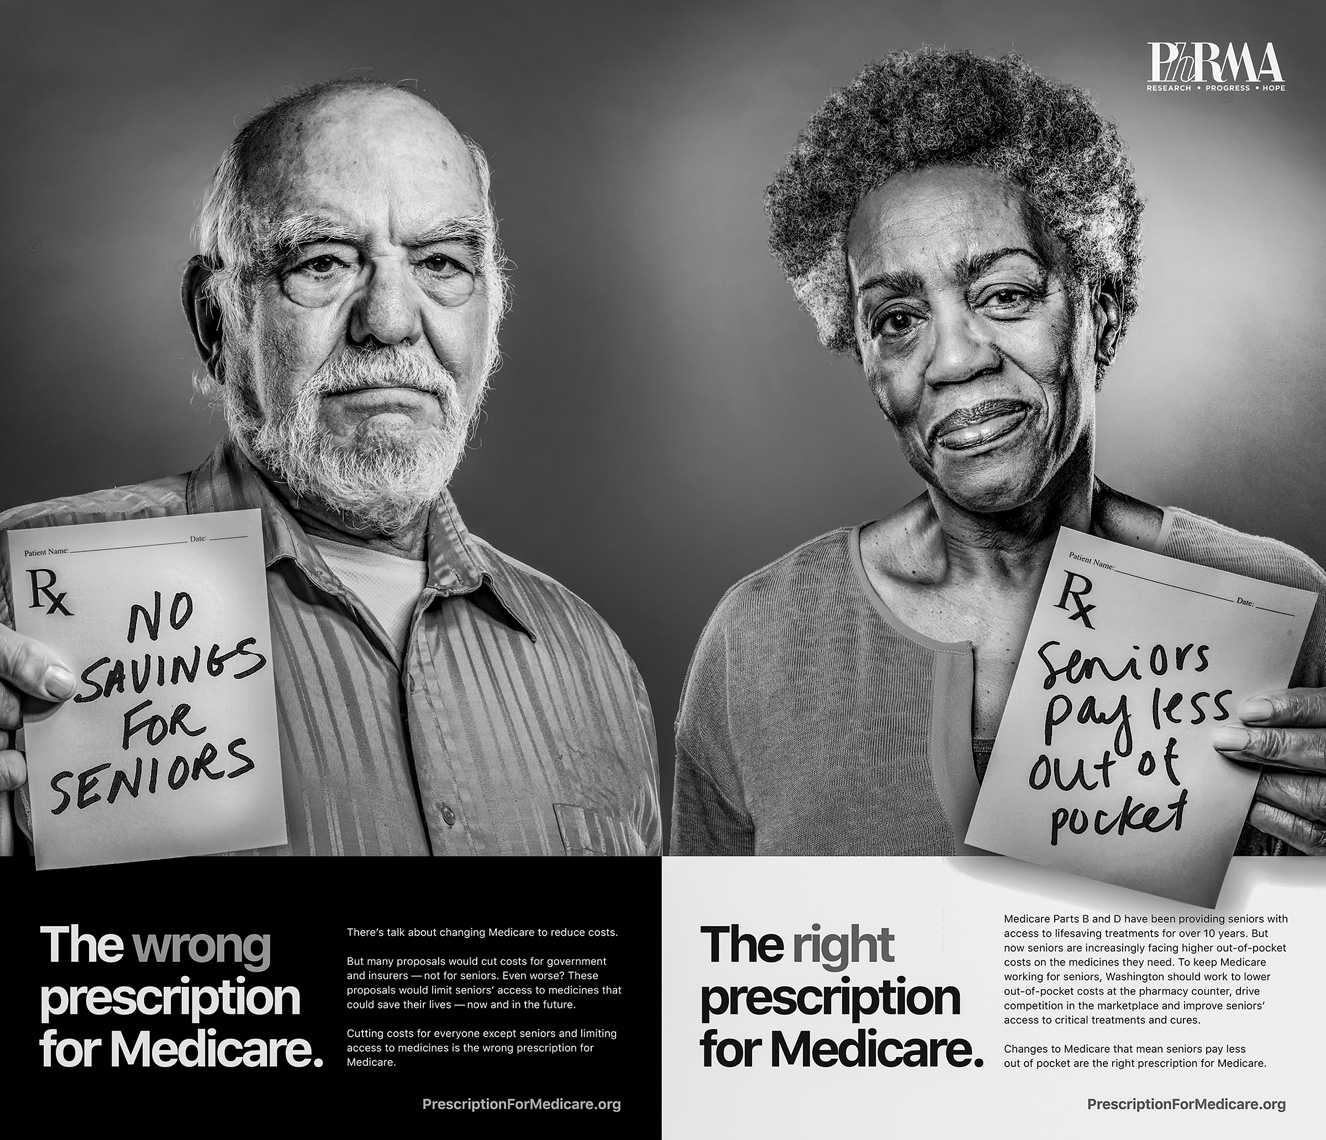 Advertising campaign photographed for Purple Strategies for Phrma in Washington, D.C.